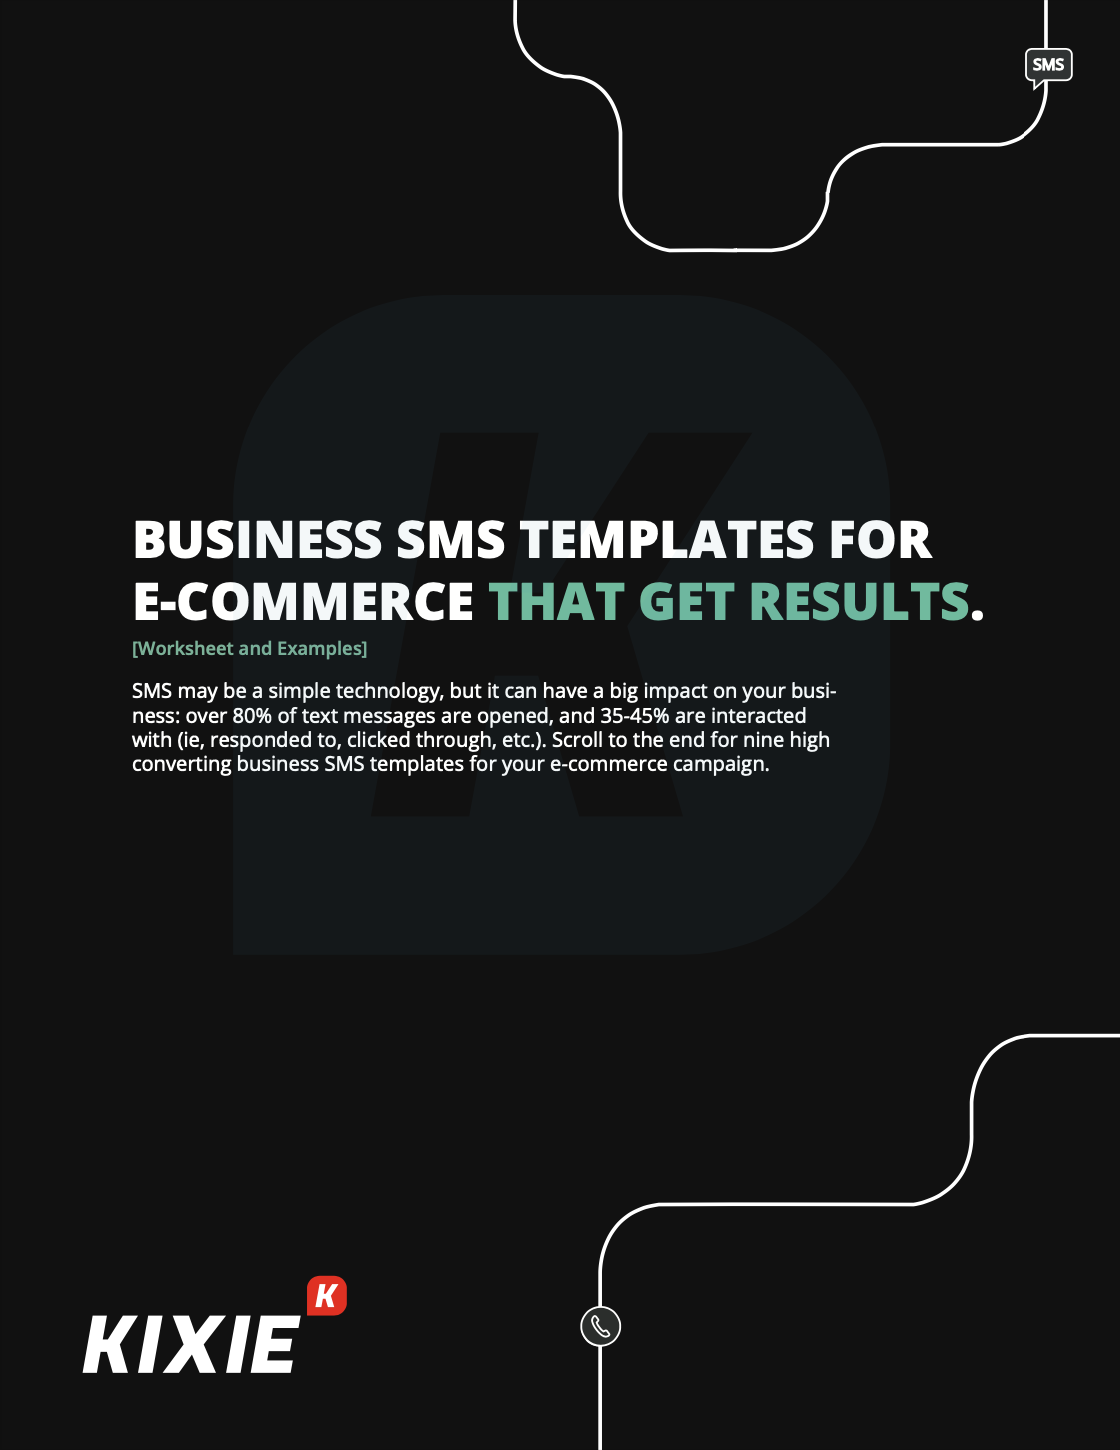 9 Business SMS Templates for E-Commerce